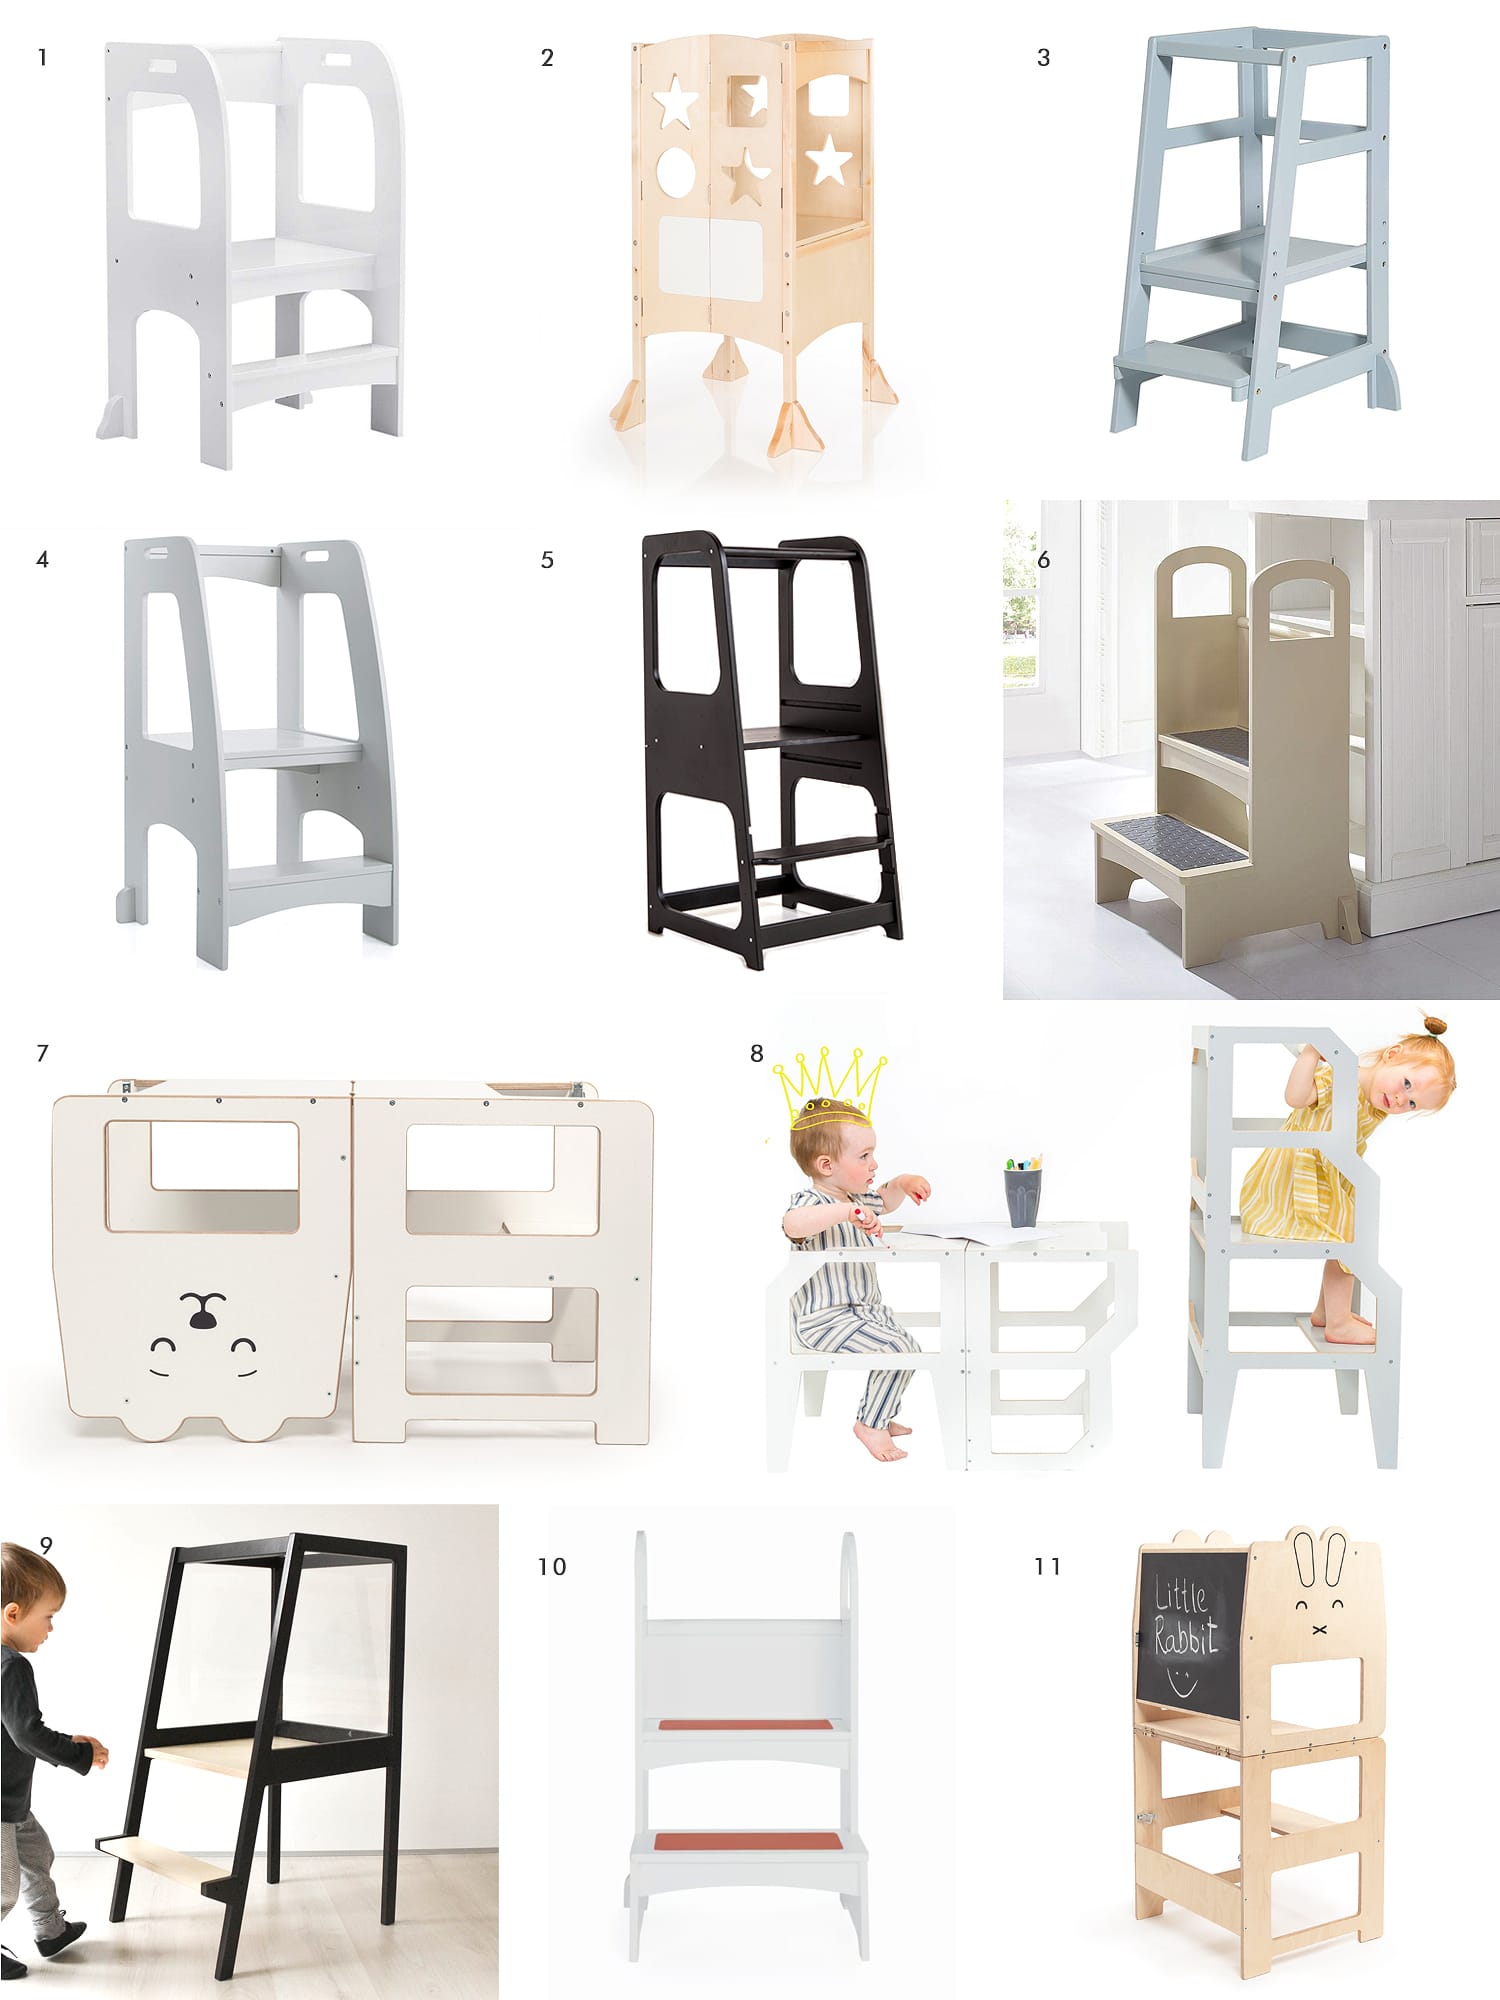 Learning towers for growing and curious toddlers | via Yellow Brick Home